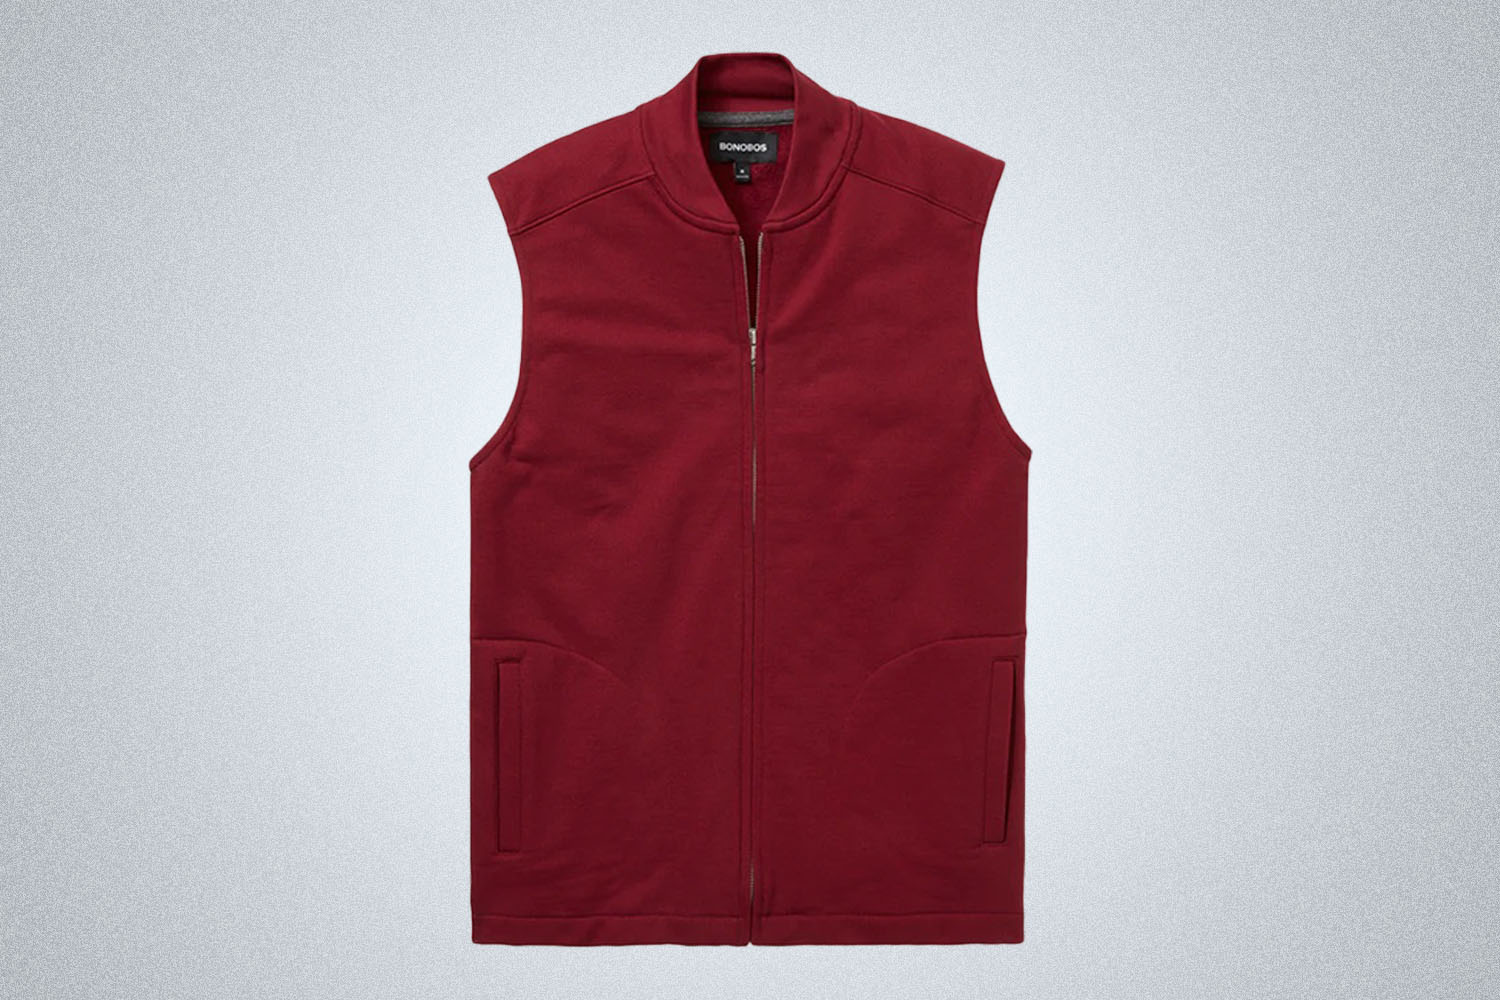 a red vest from Bonobos on a grey background